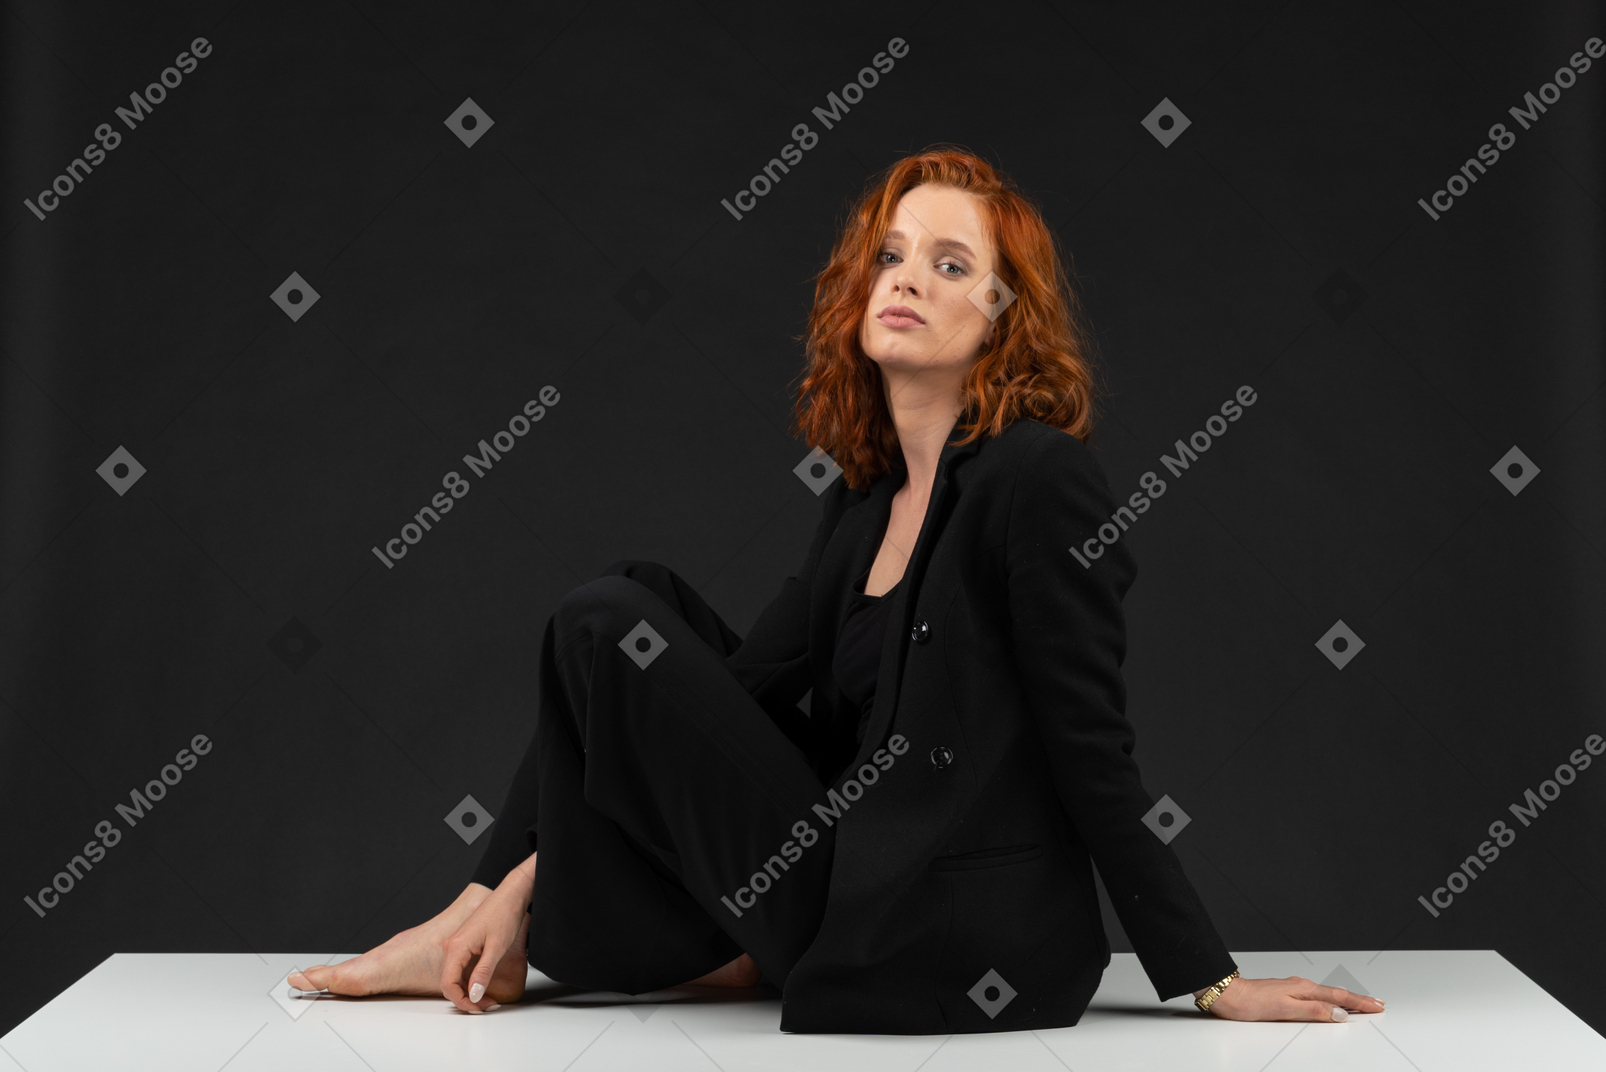 A side view of the young woman dressed in black, sitting on the table and looking to the camera